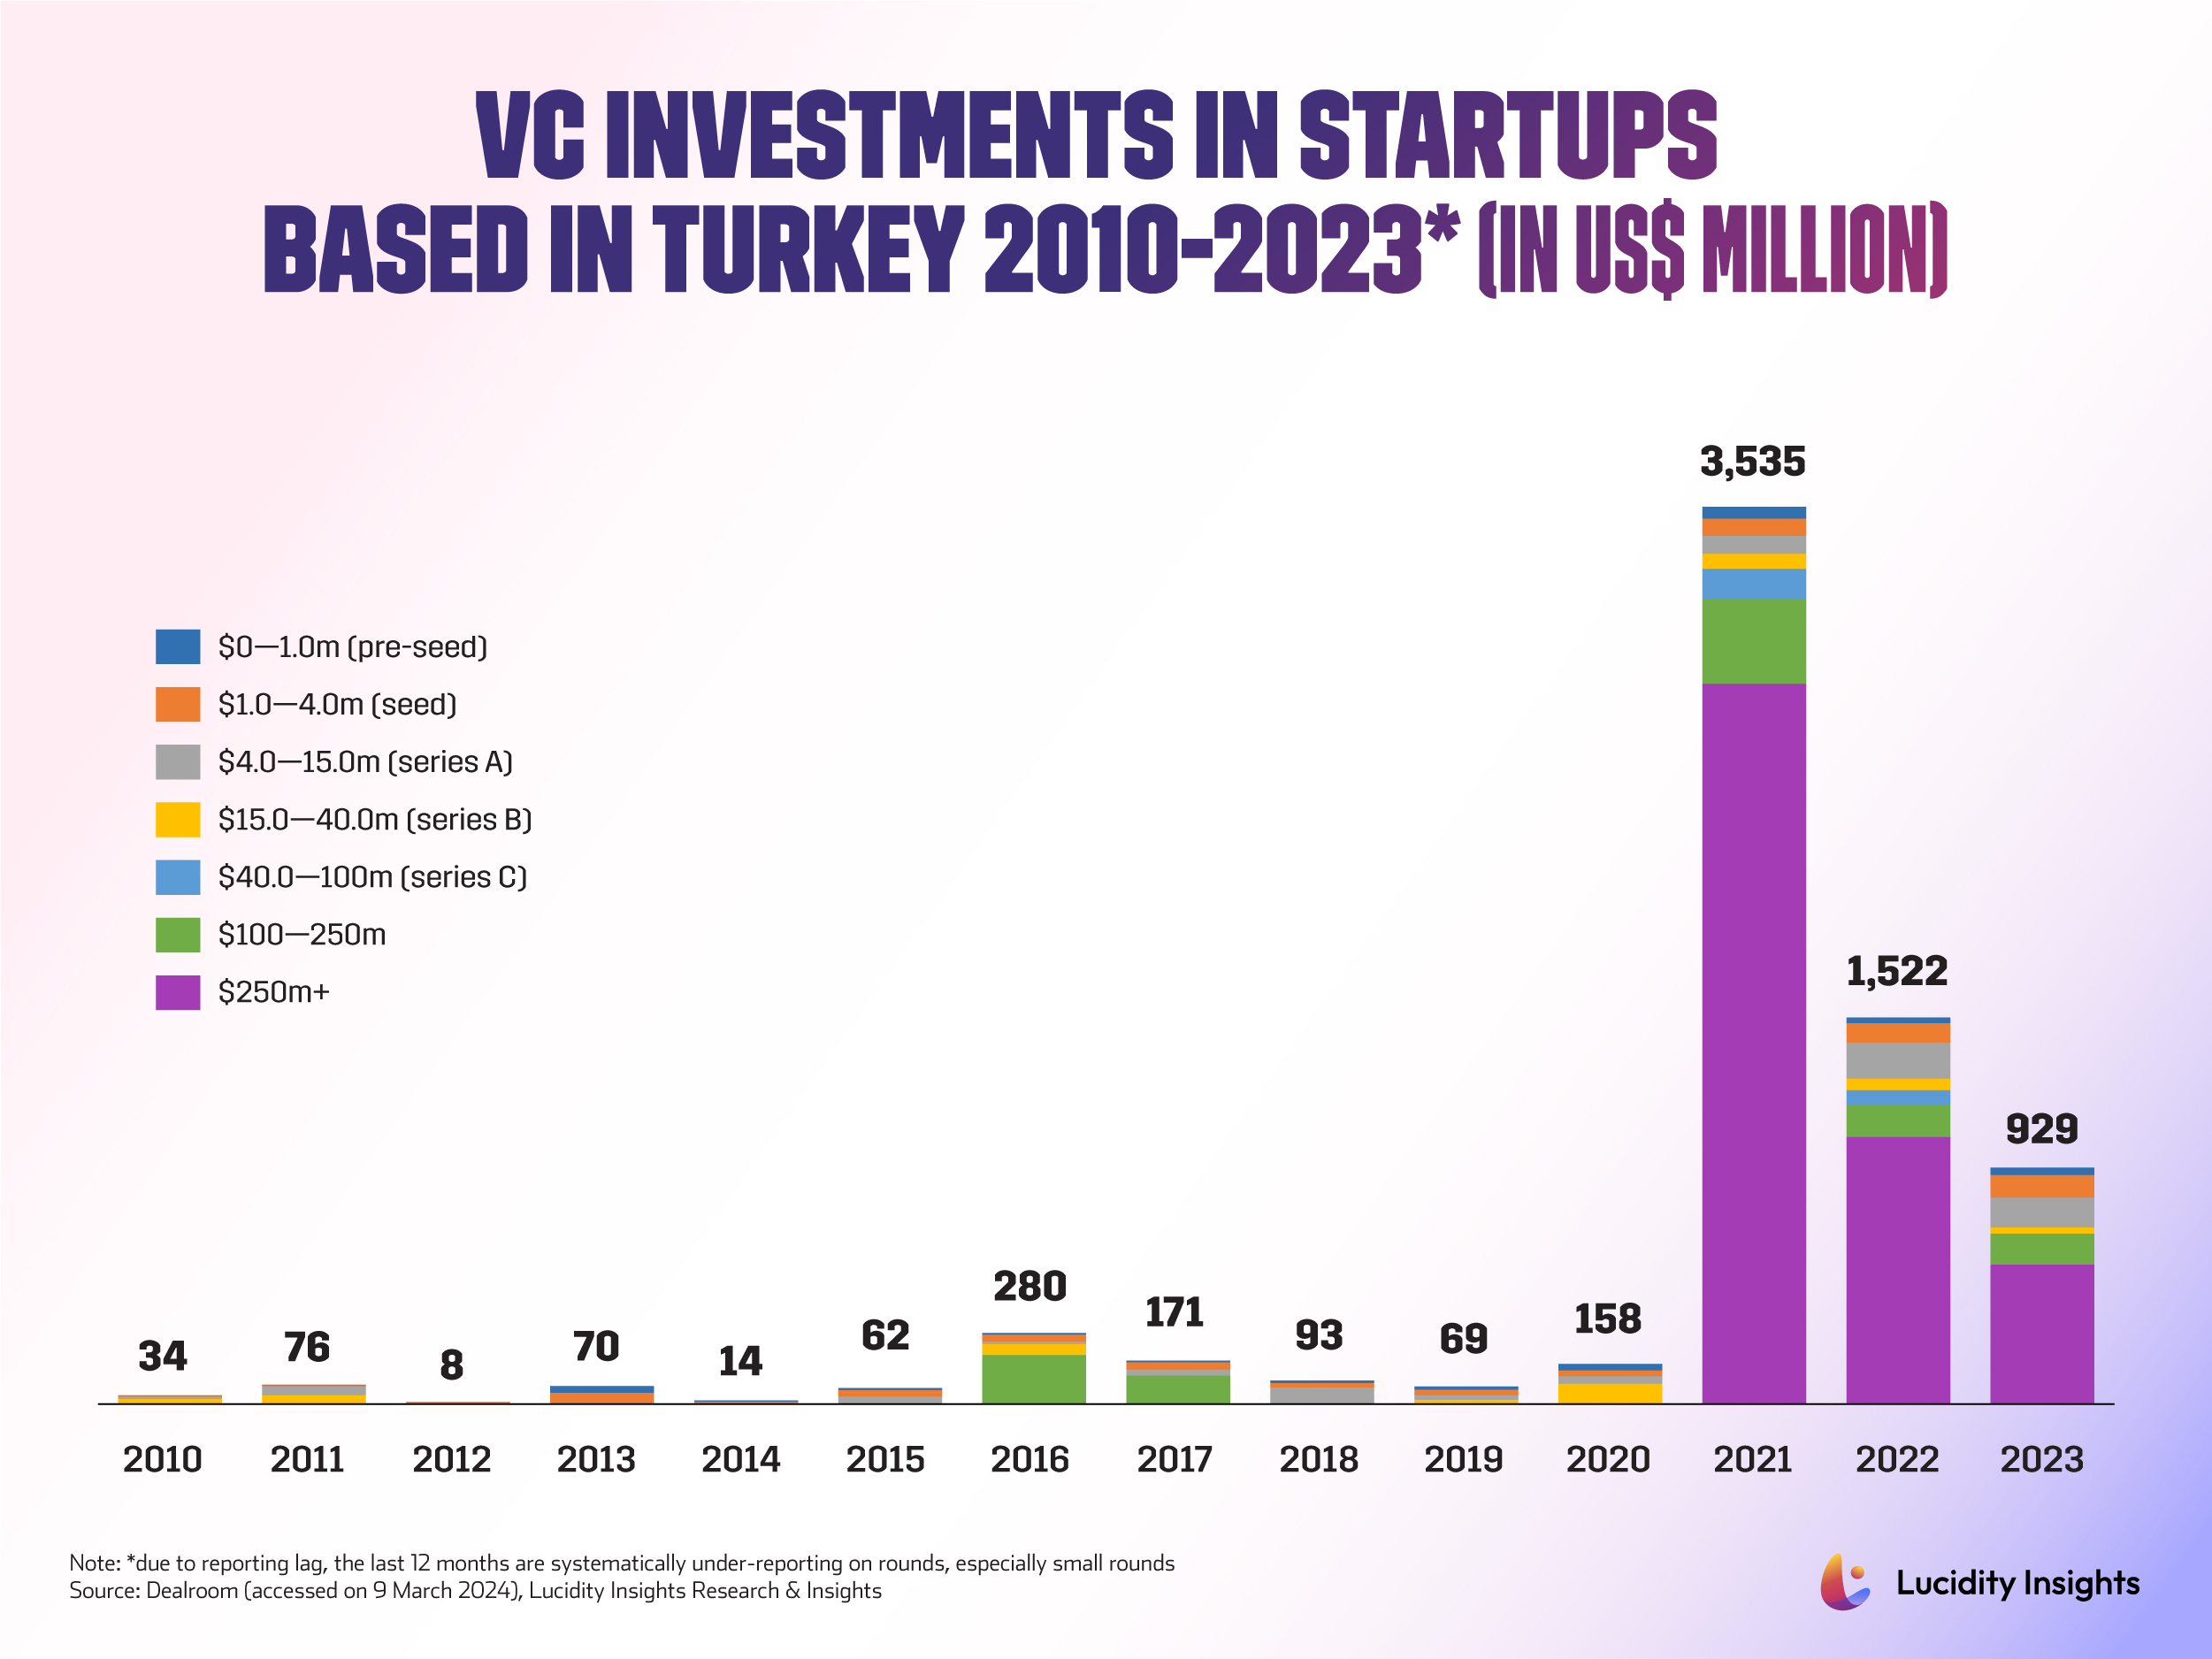 VC Investments in Startups Based in Turkey 2010-2023